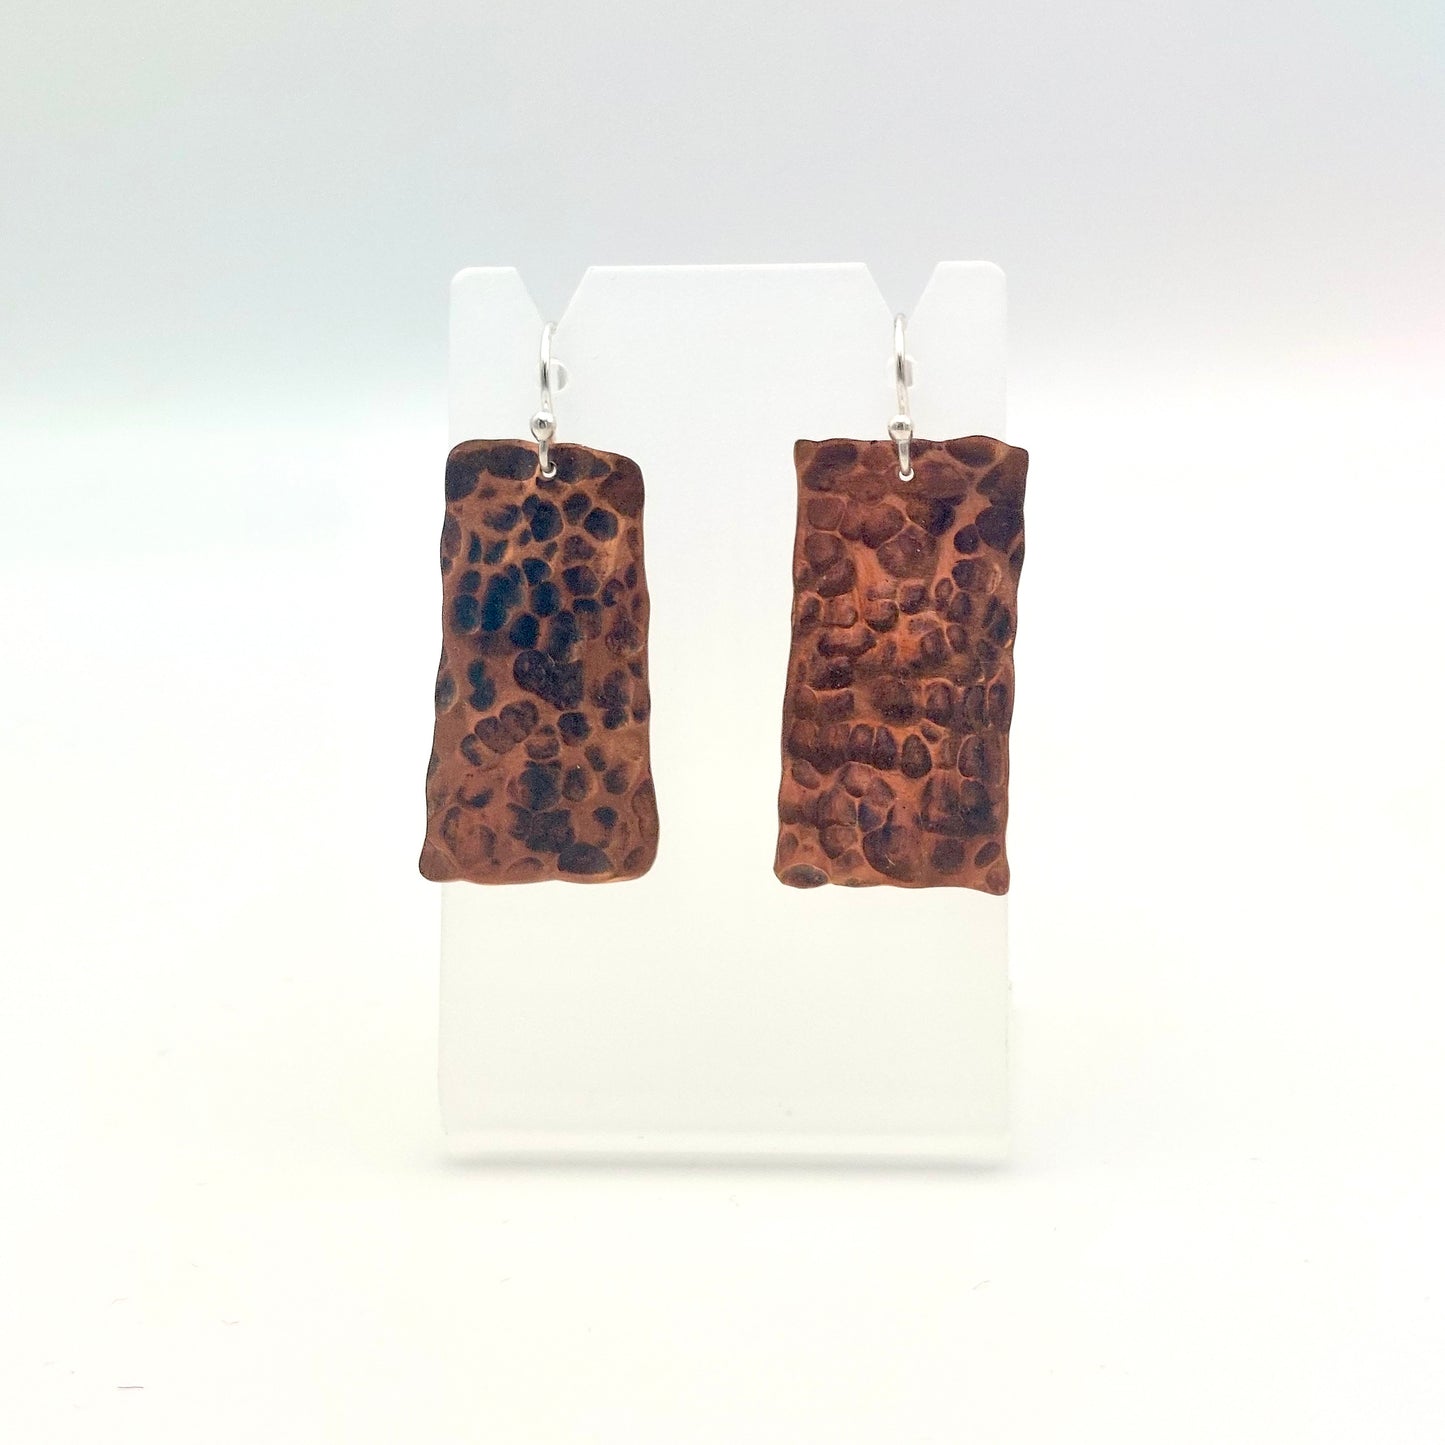 Hammer and Oxidised Copper Earrings